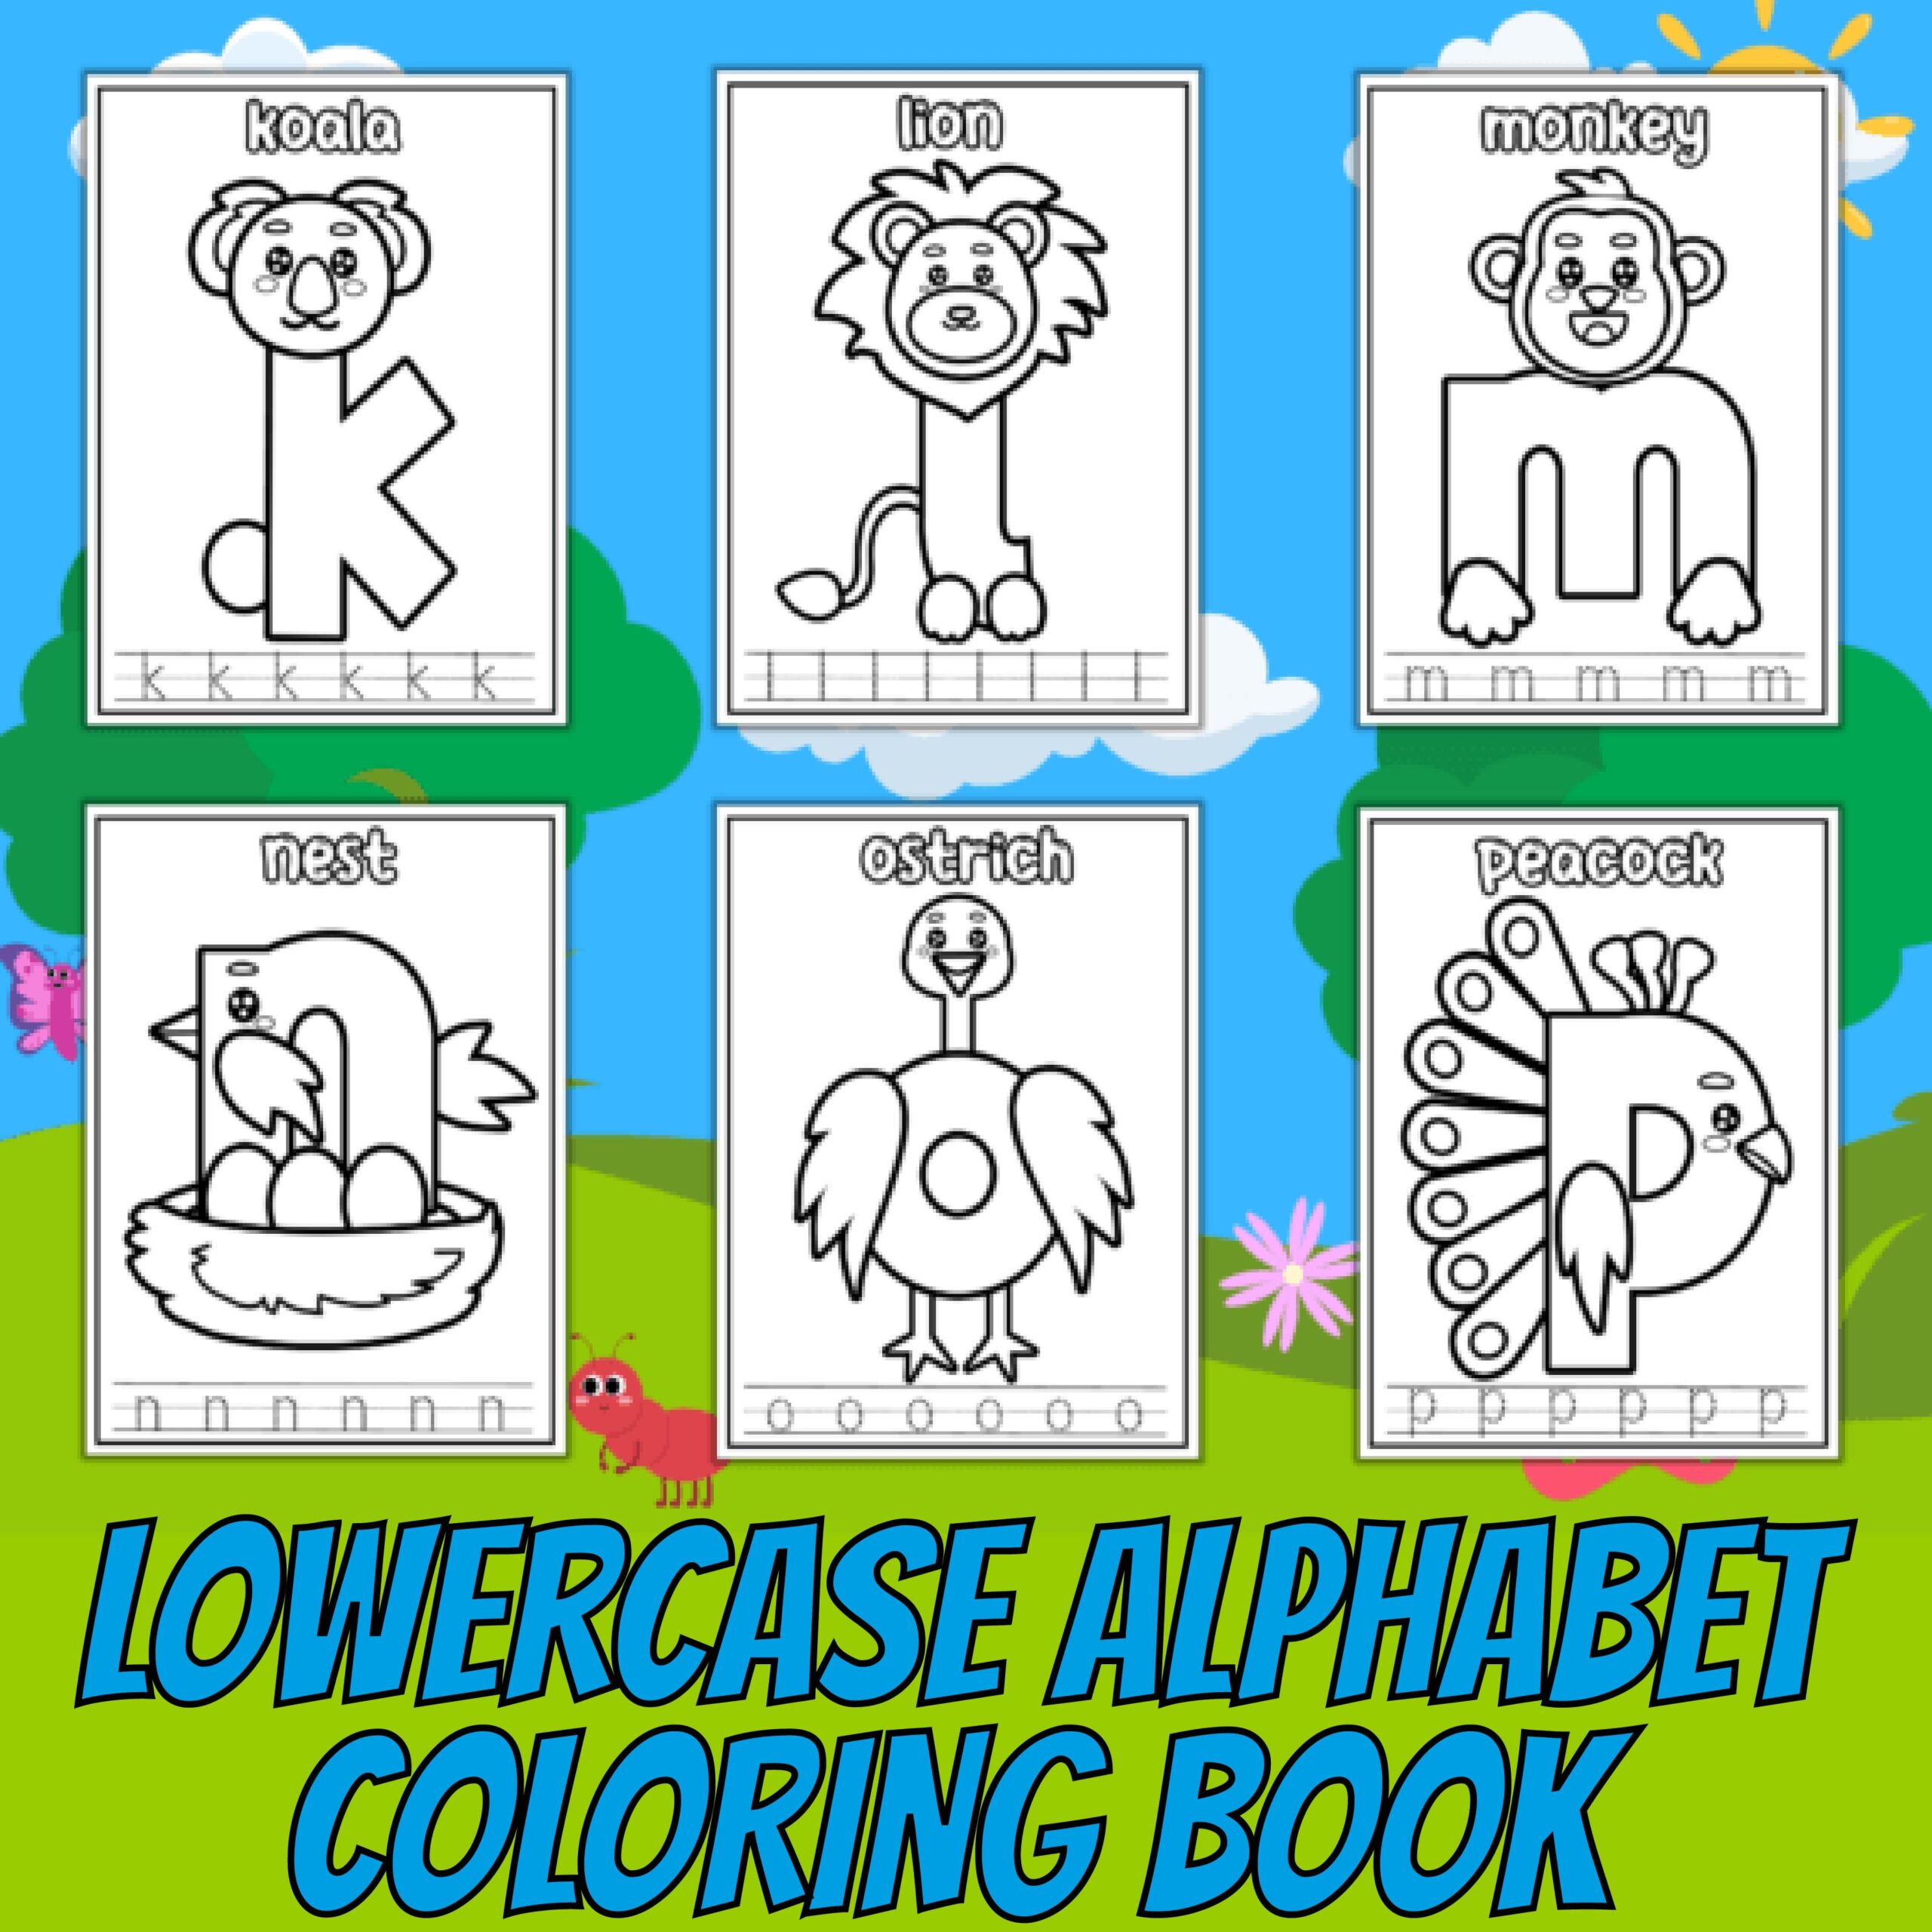 Lowercase alphabet coloring book for toddlers preschoolers kindergarteners made by teachers